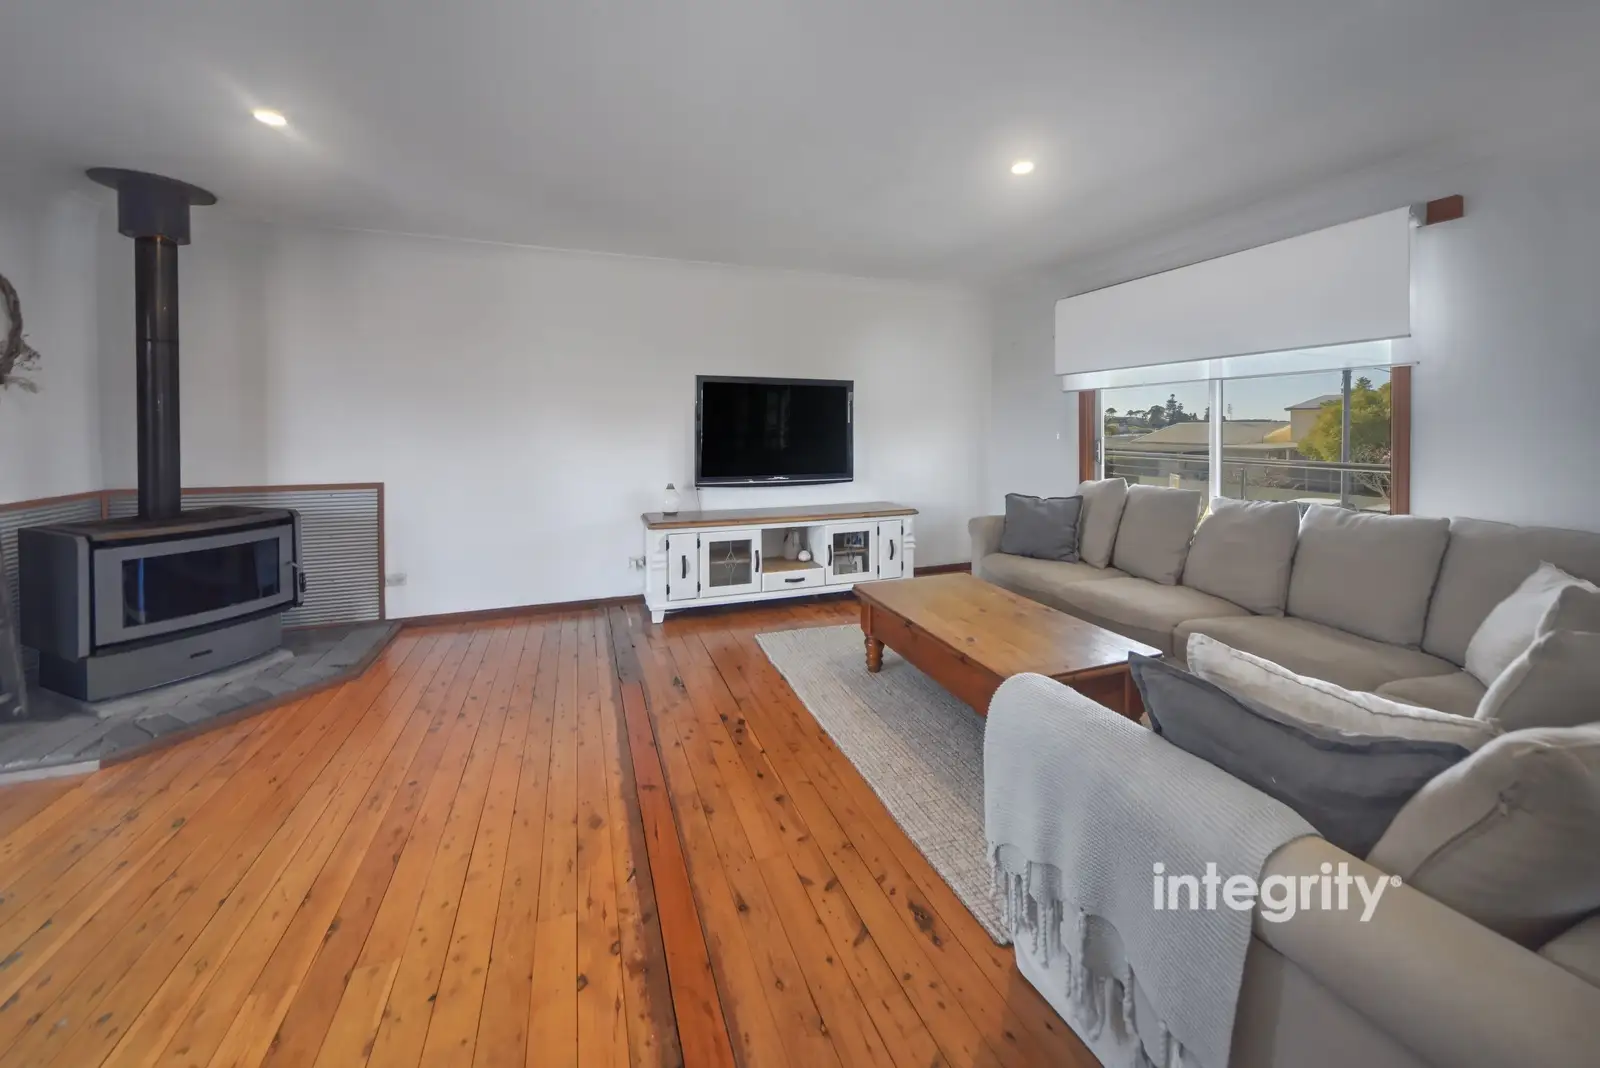 21 Haiser Road, Greenwell Point For Sale by Integrity Real Estate - image 4